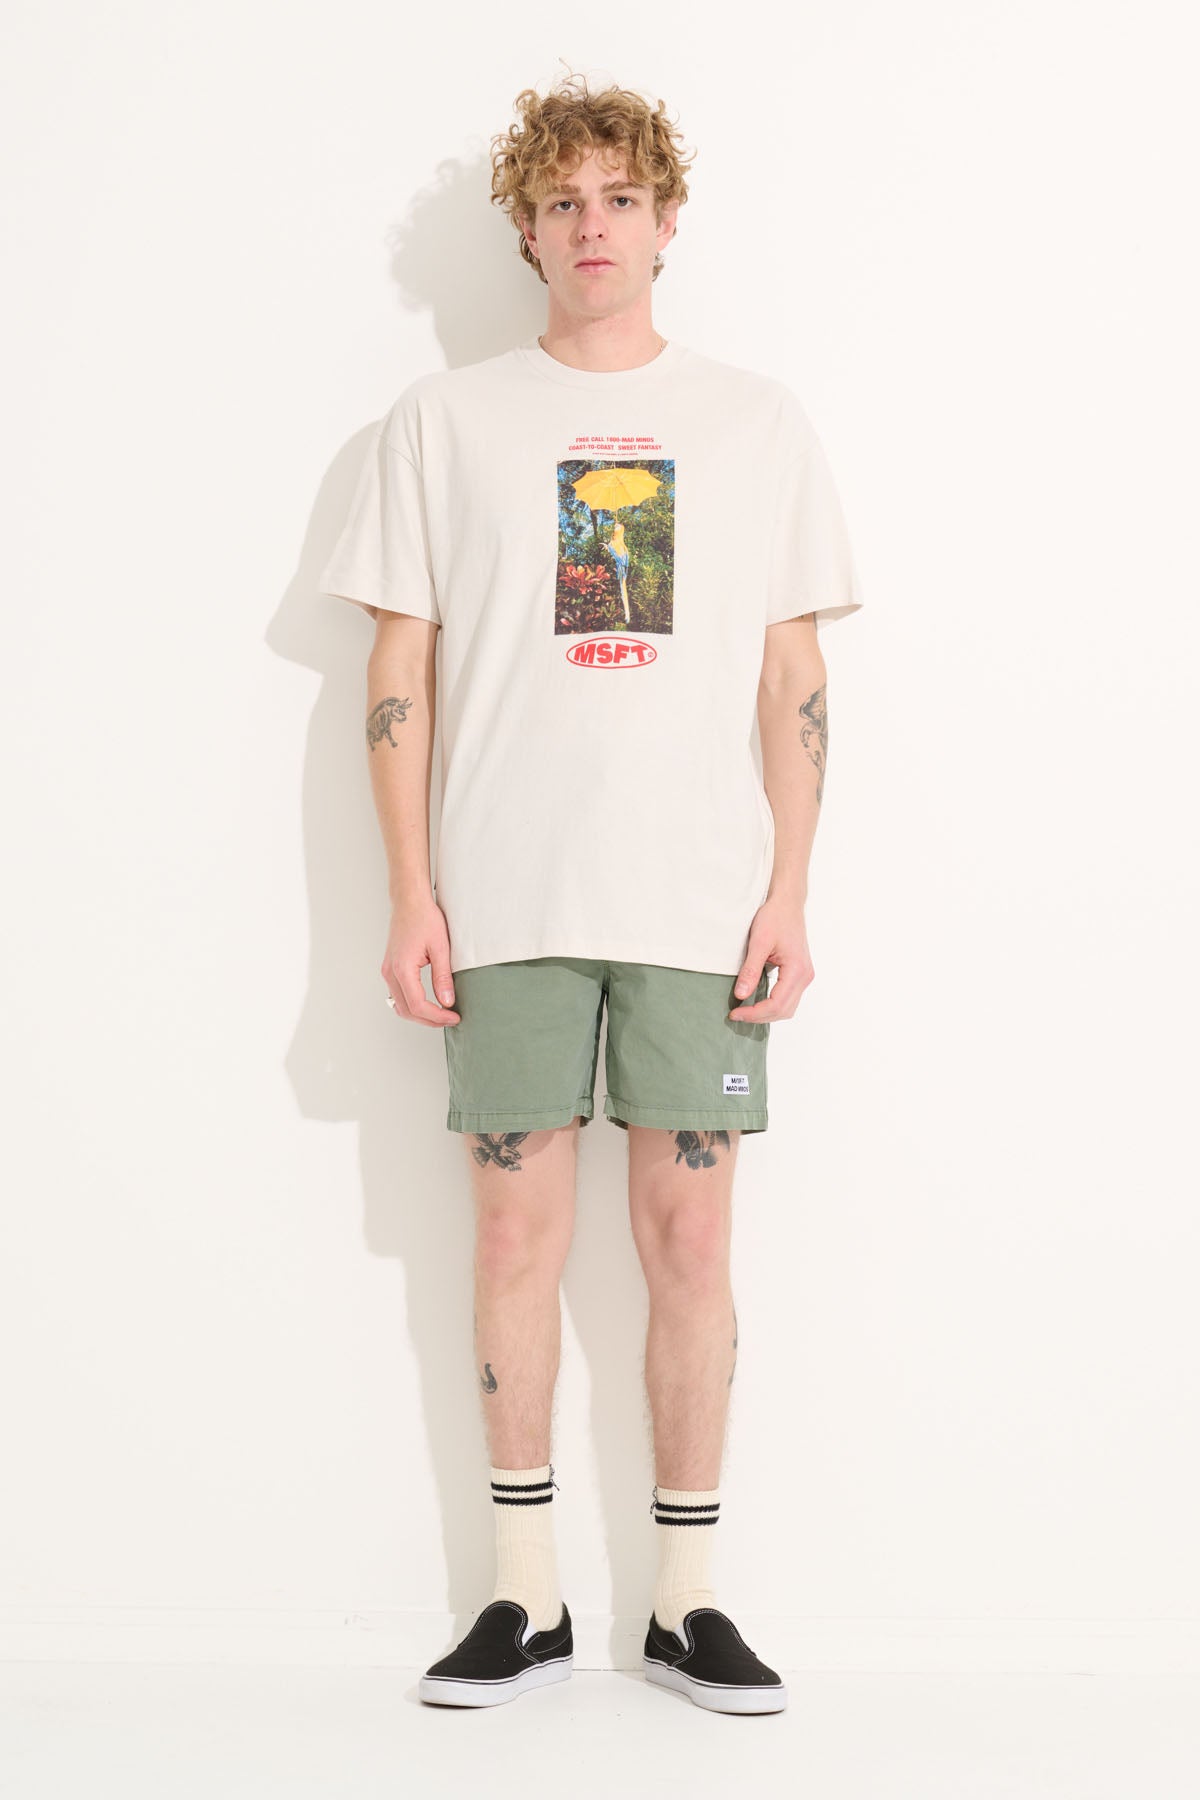 Misfit Shapes - Tall Springs 50-50 SS Tee - Thrift White